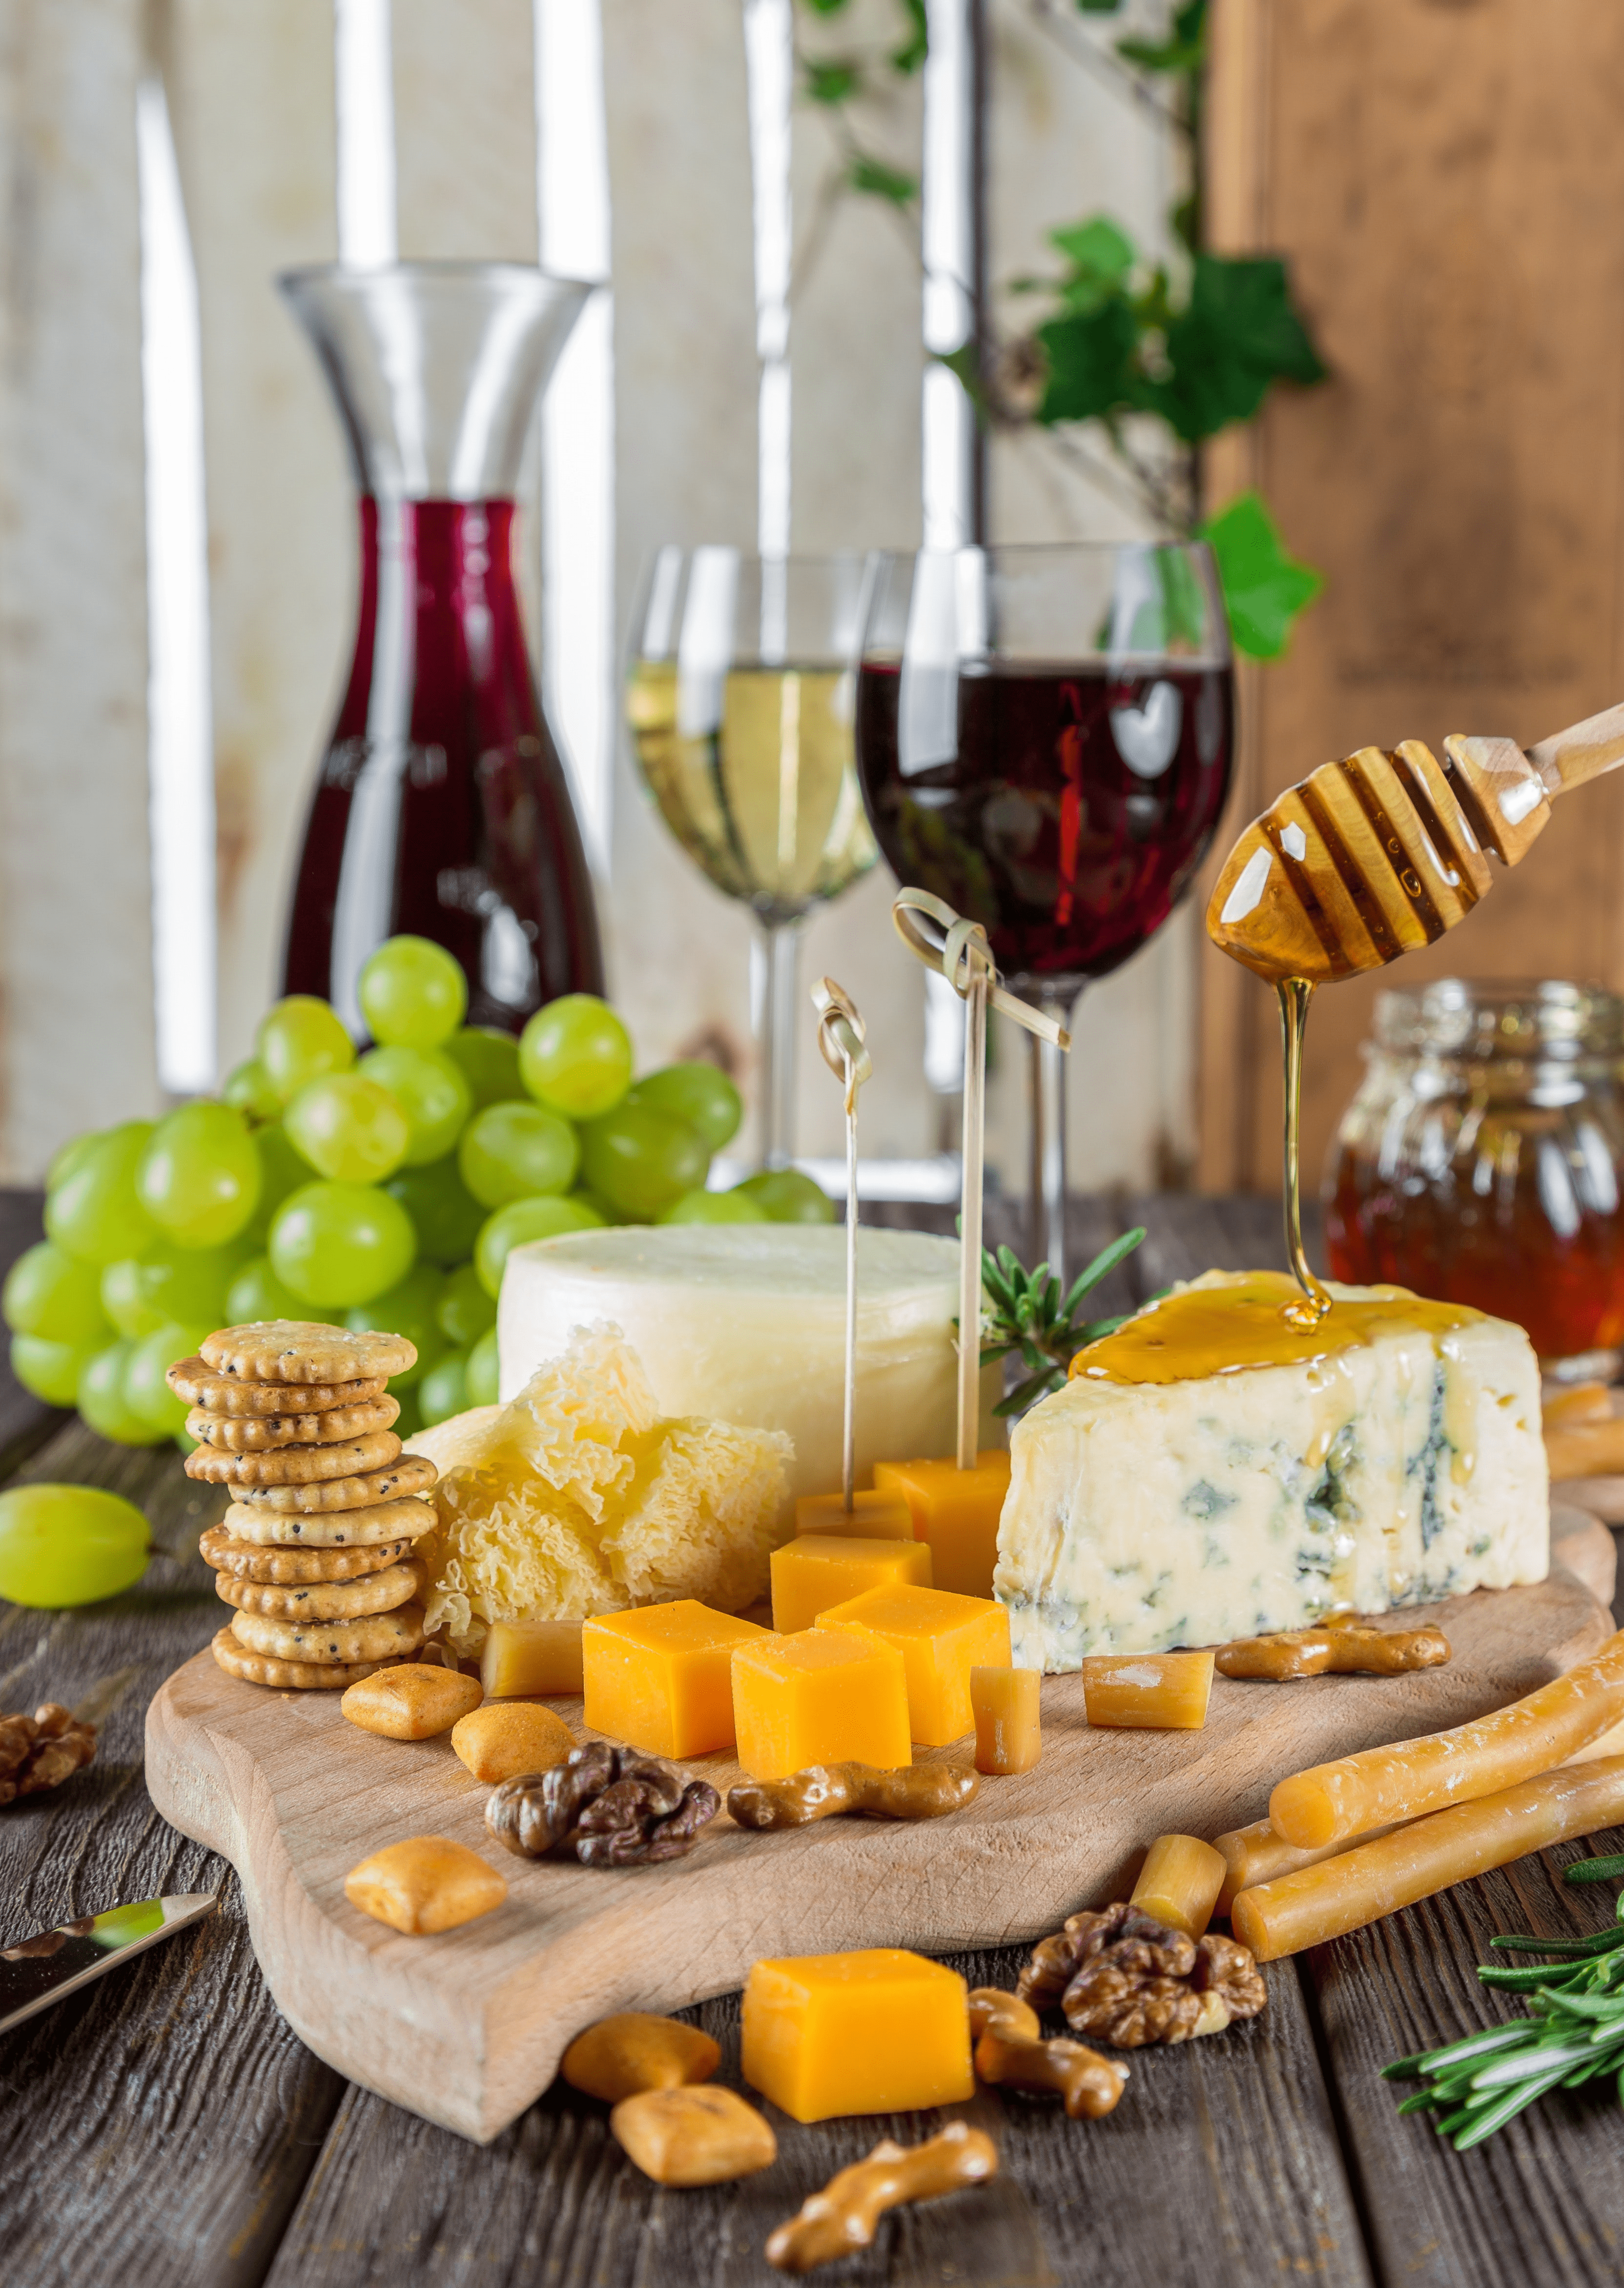 Wine and charcuterie board with different cheeses and biscuits